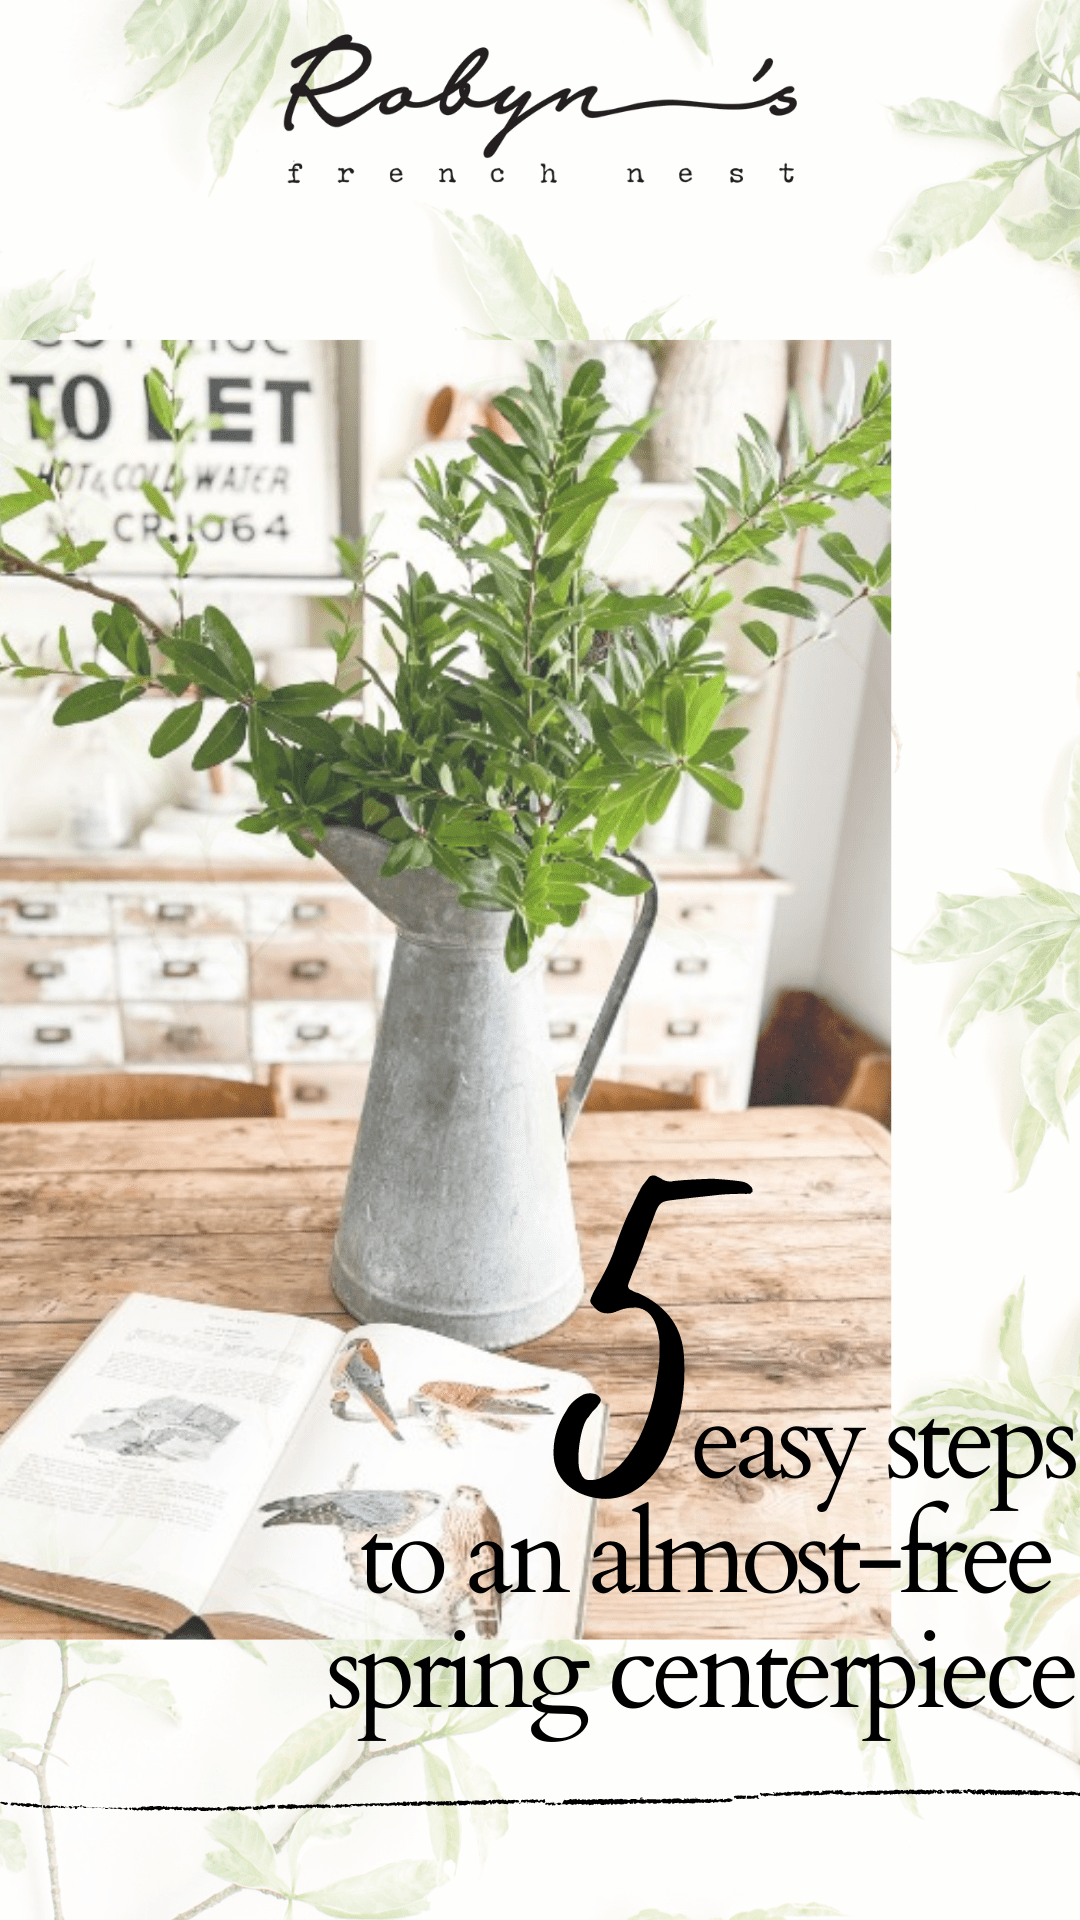 5 Easy Ways to an Almost-Free Spring Centerpiece